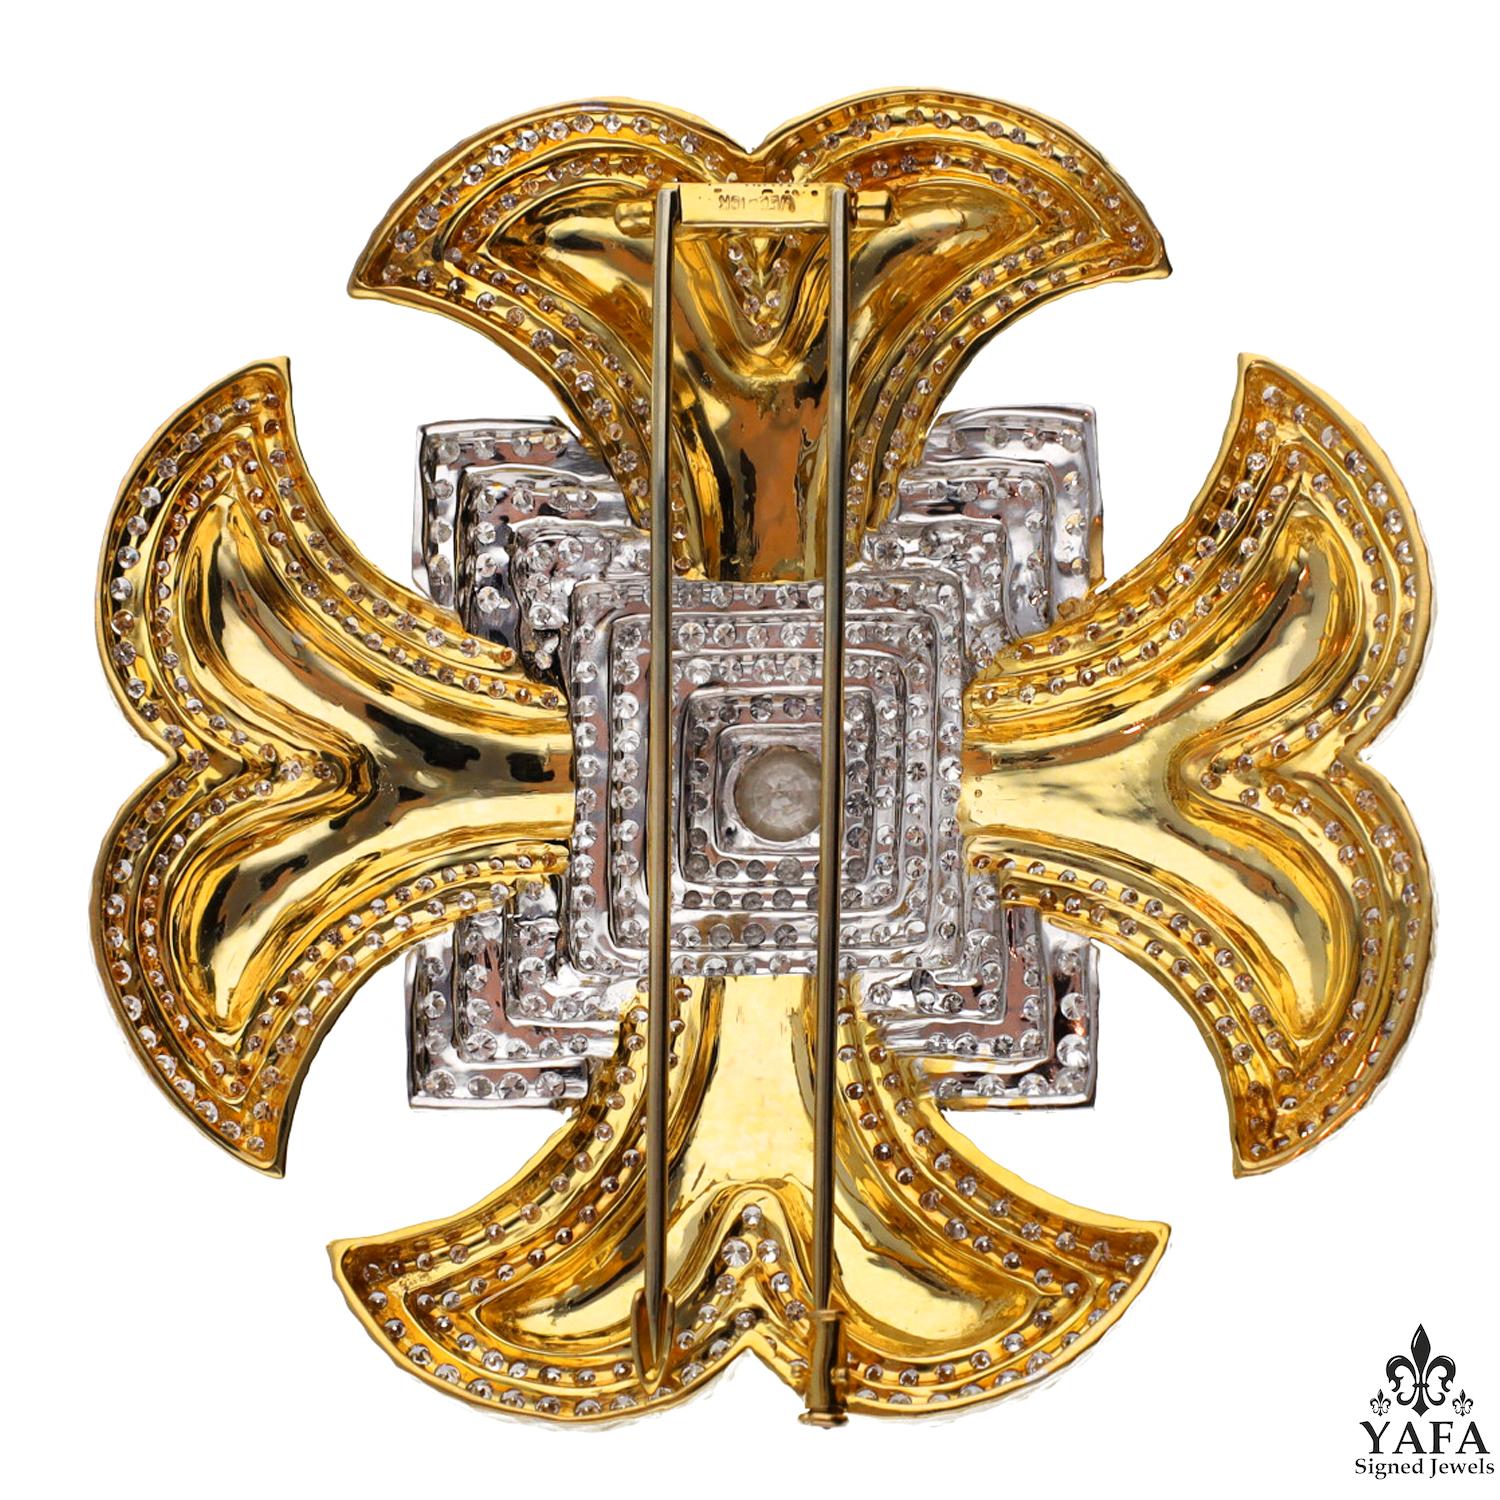 DAVID WEBB Maltese Cross Diamond Brooch in 18k Yellow Gold and Platinum.

An exquisitely textured gold design emblematic to David Webb, the Maltese Cross motif has been seen in various iterations throughout the years of the brand. The center of this